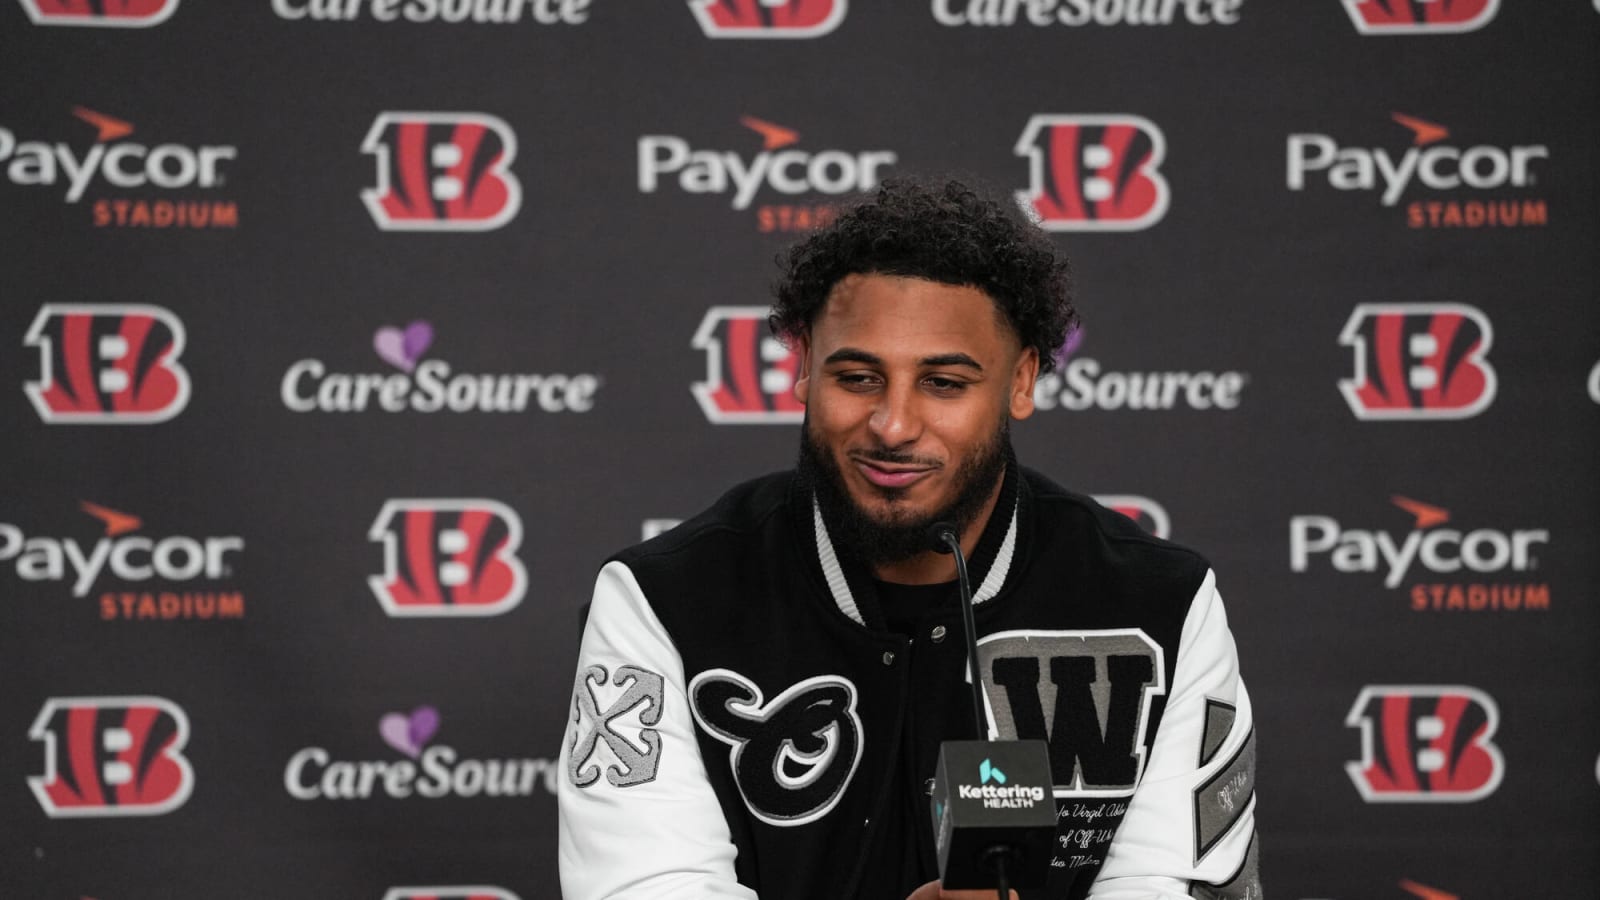 National media outlet says Bengals made one of the smartest moves of NFL free agency